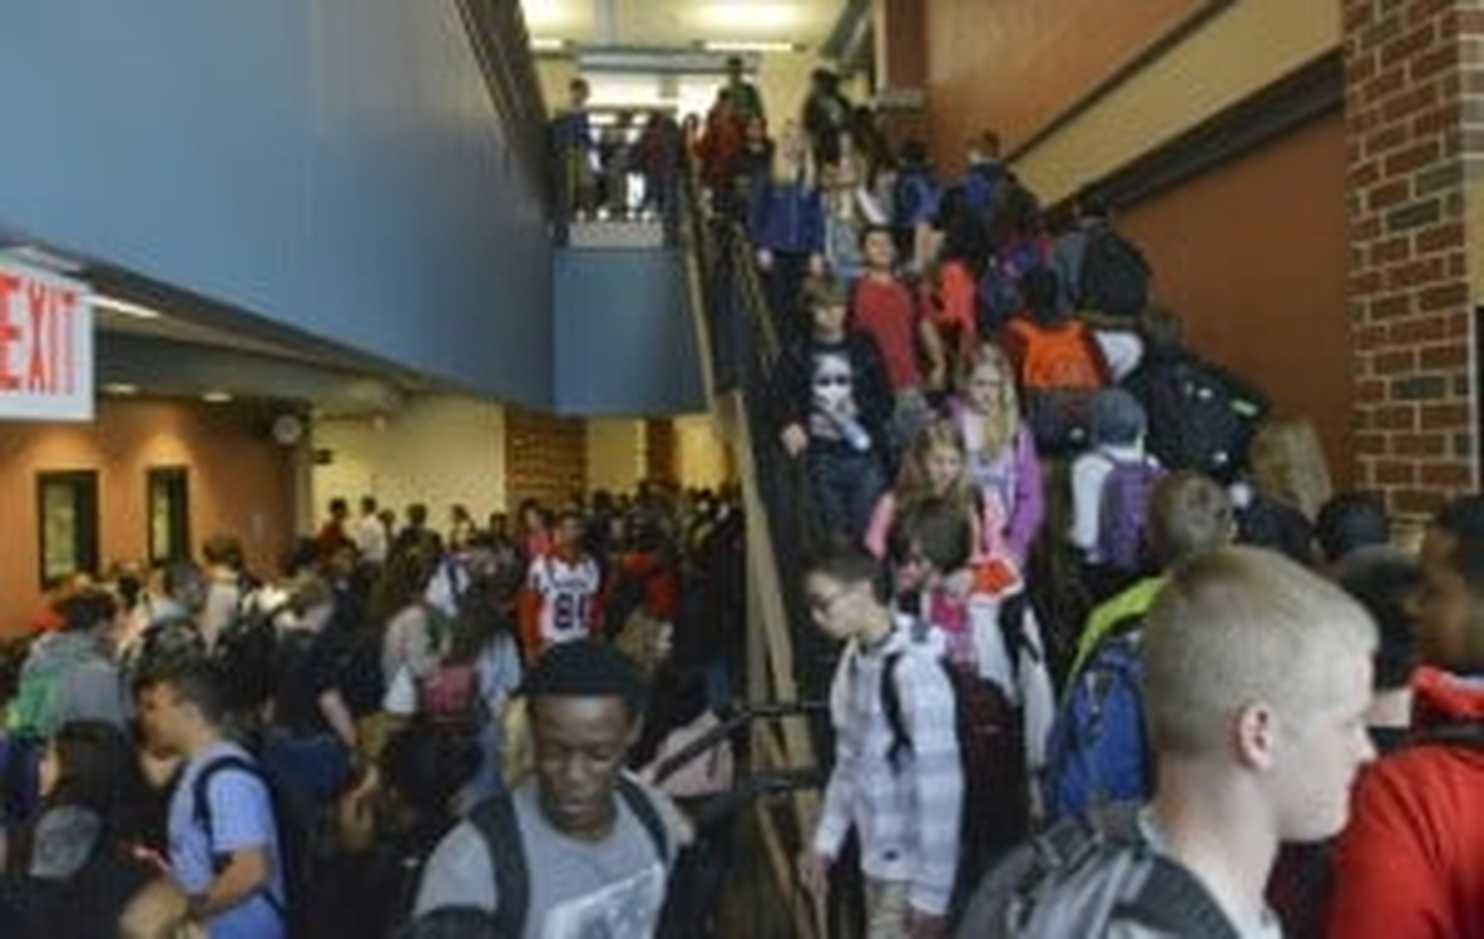 Class size matters a lot, research shows